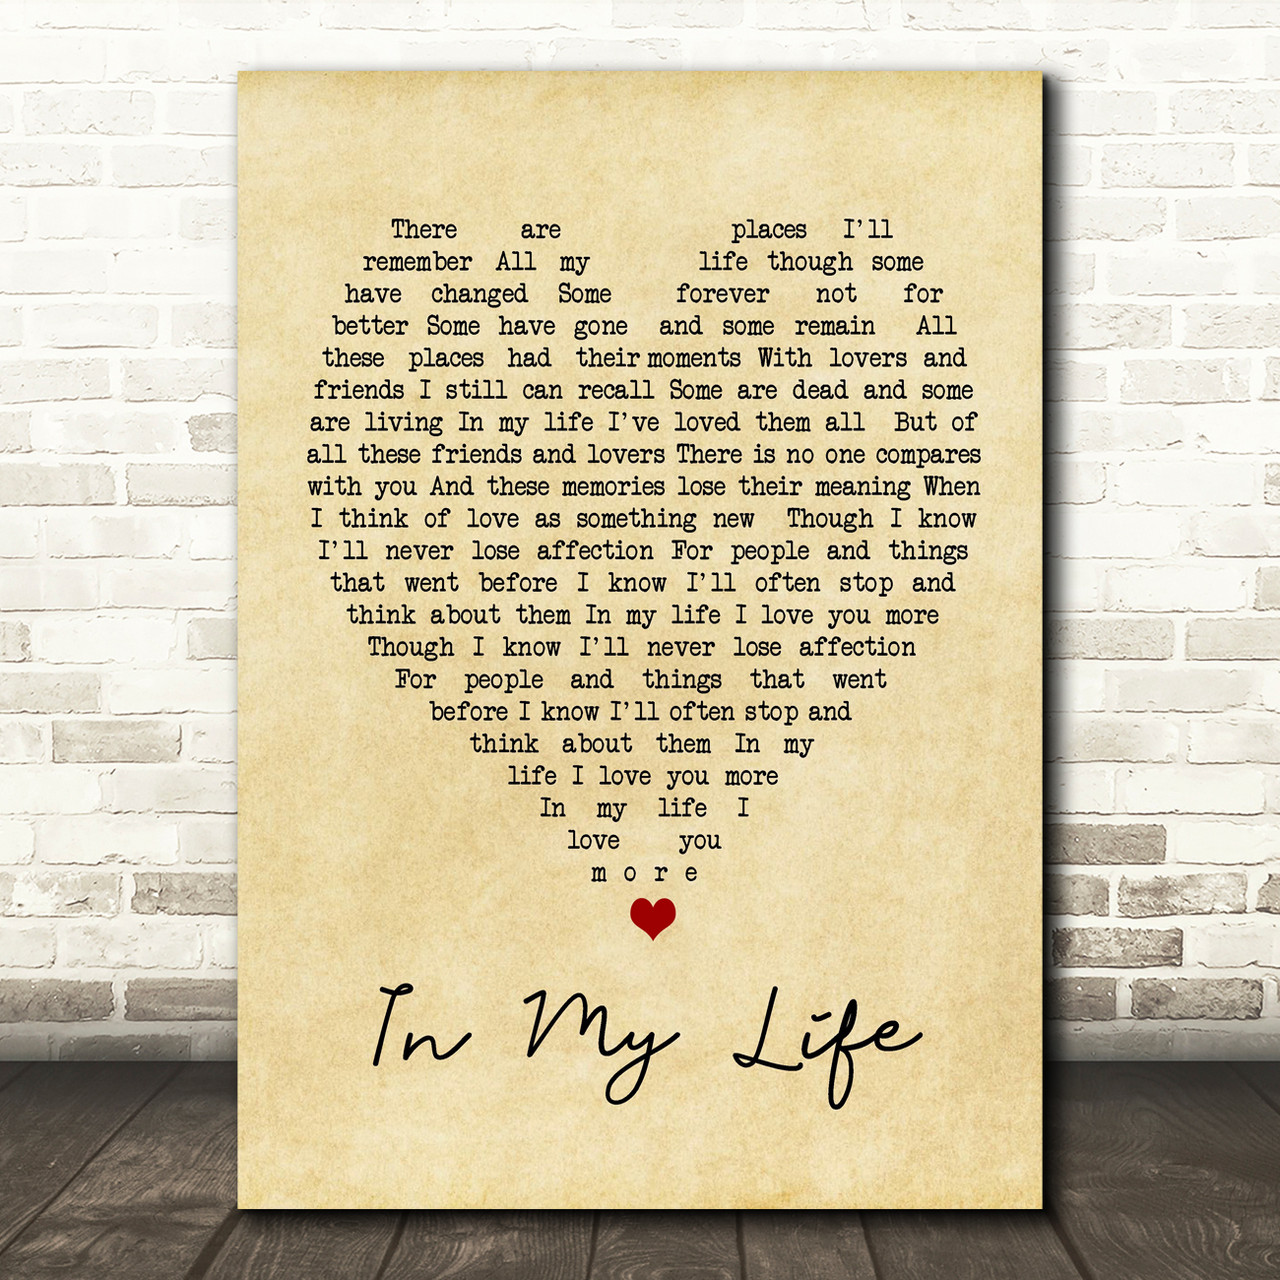 The Beatles Tell Me Why Song Lyric Quote Print